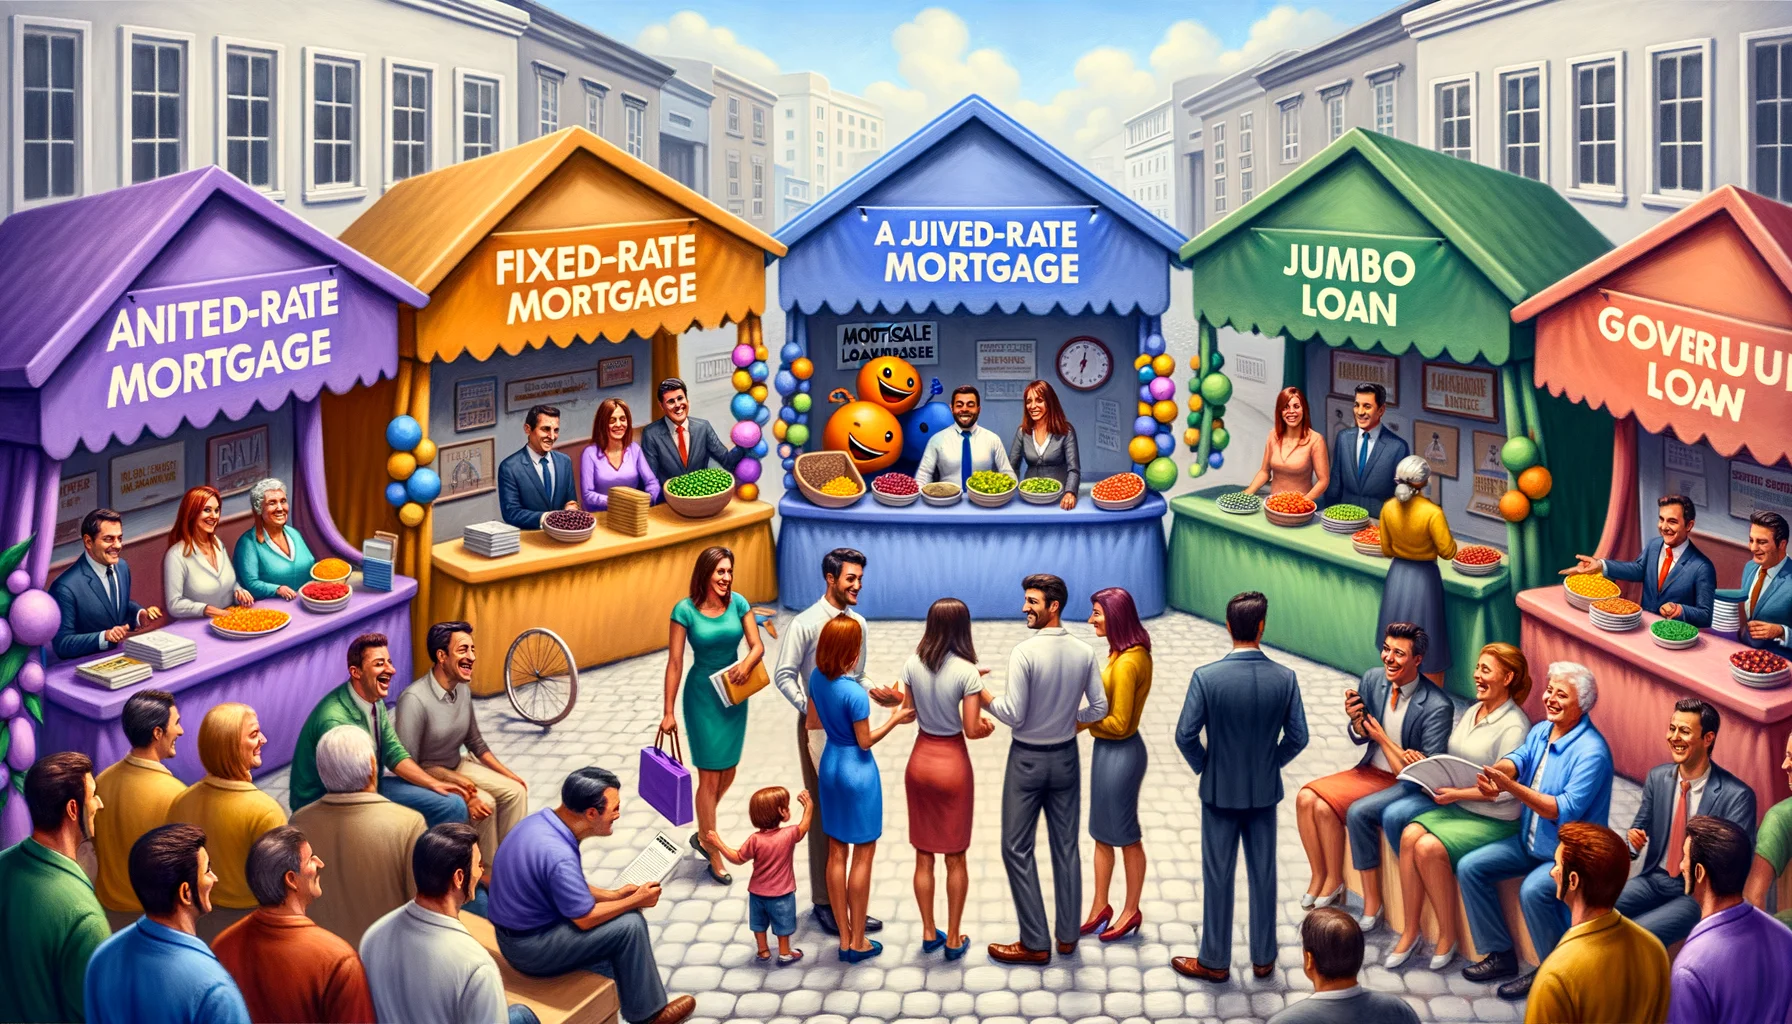 Imagine a humorous, lifelike scene representing different mortgage loan types. The setting is a bustling financial marketplace, where each loan type is personified as a friendly advisor at a colorful stall. A fixed-rate mortgage as a calm, reliable advisor in blue; an adjustable-rate mortgage as a vibrant, flexible advisor in orange; a jumbo loan personified as a tall, elegant advisor in a purple attire, and a government-insured loan embodied by a green, protective advisor. Shoppers, diverse in age, ethnicity, and gender, engage with the advisors, their faces depicting intrigue, contentment, and amusement. The perfect scenario where everyone is happy understanding their mortgage options.